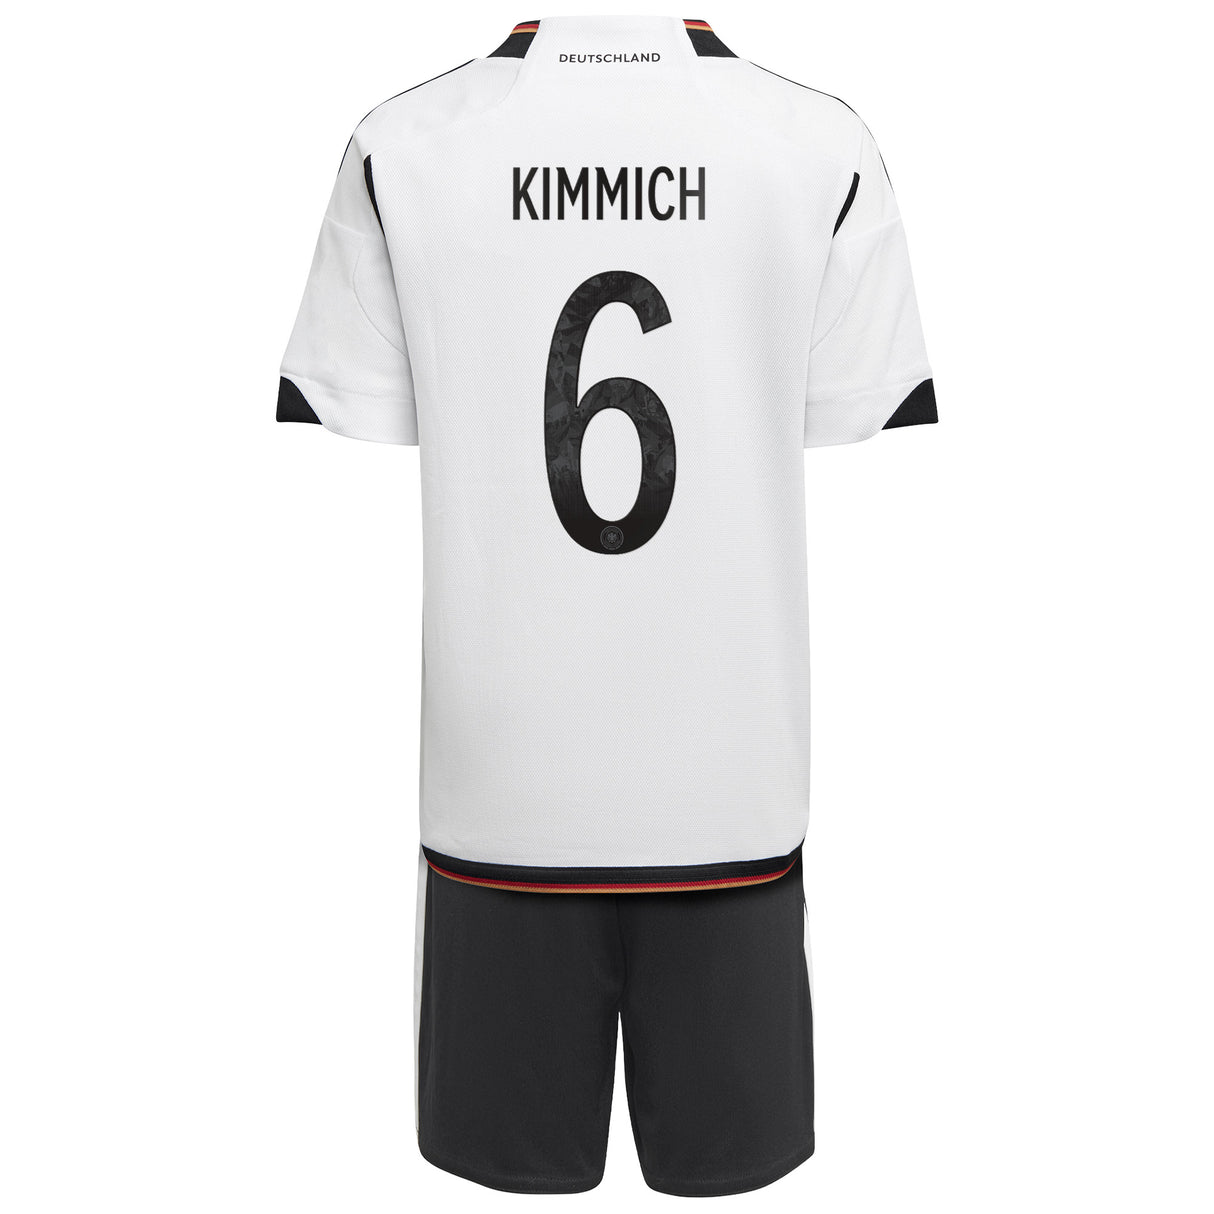 Germany Home Minikit with Kimmich 6 printing - Kit Captain